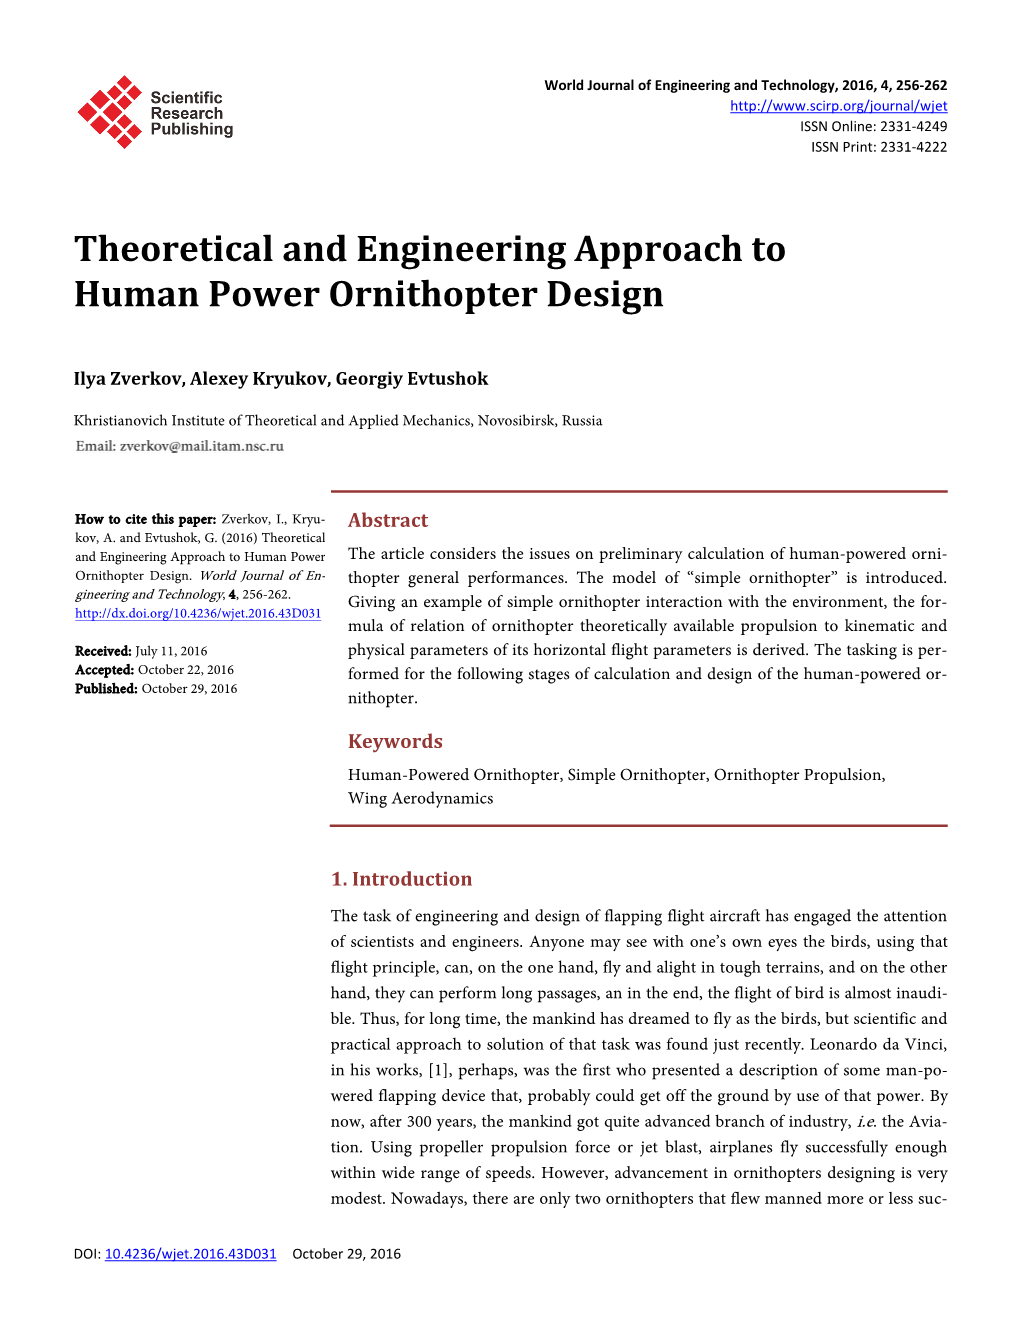 Theoretical and Engineering Approach to Human Power Ornithopter Design